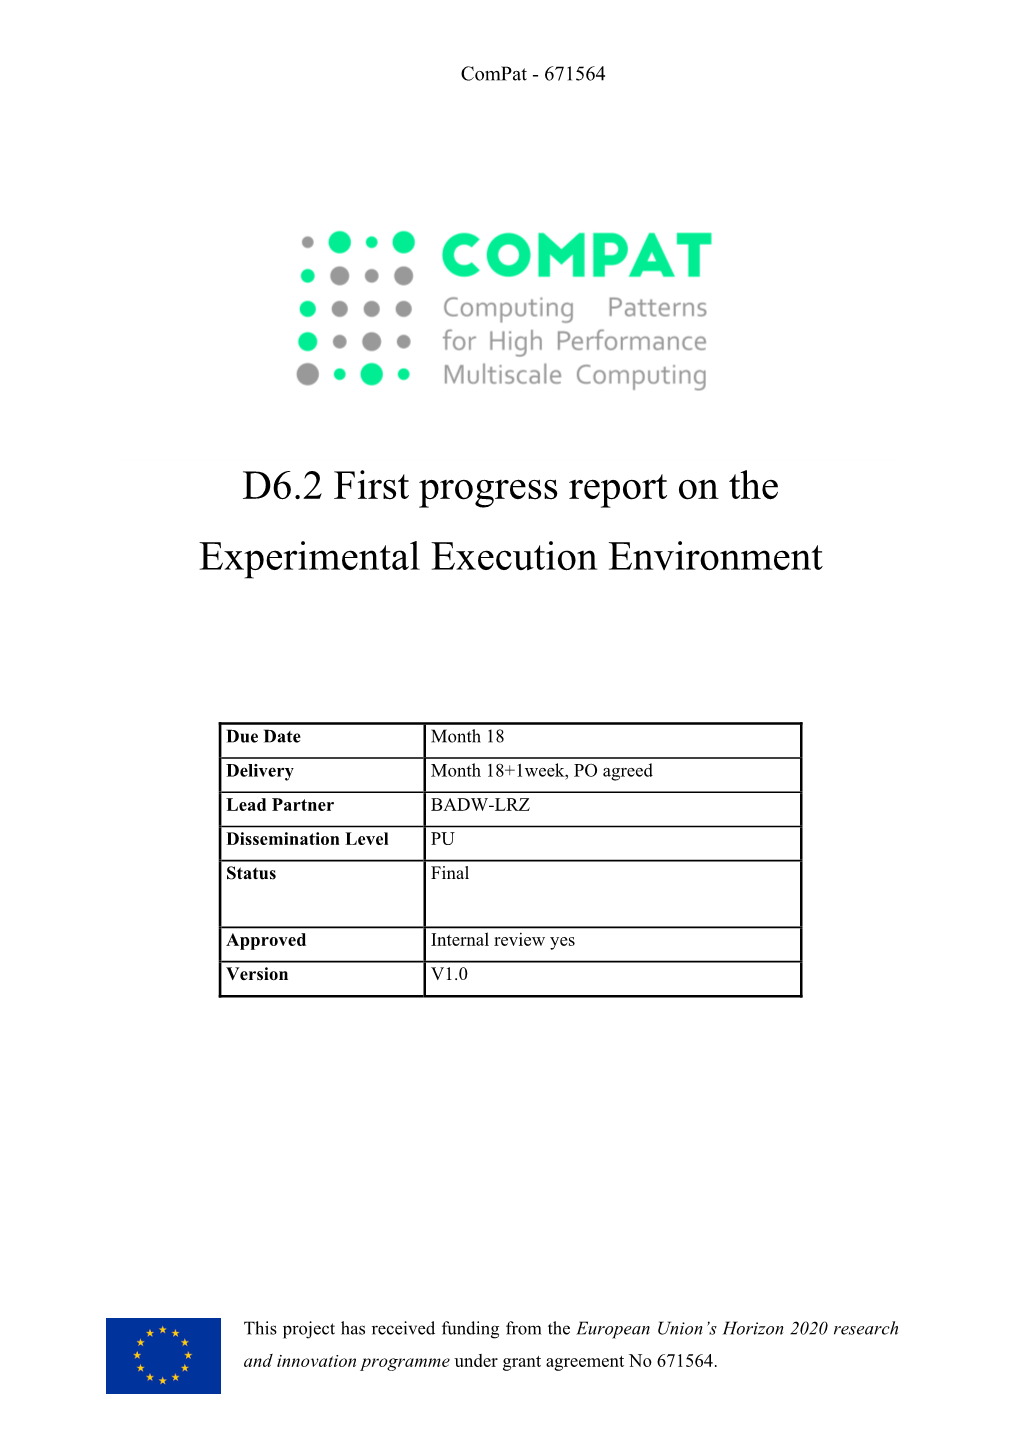 D6.2 First Progress Report on the Experimental Execution Environment